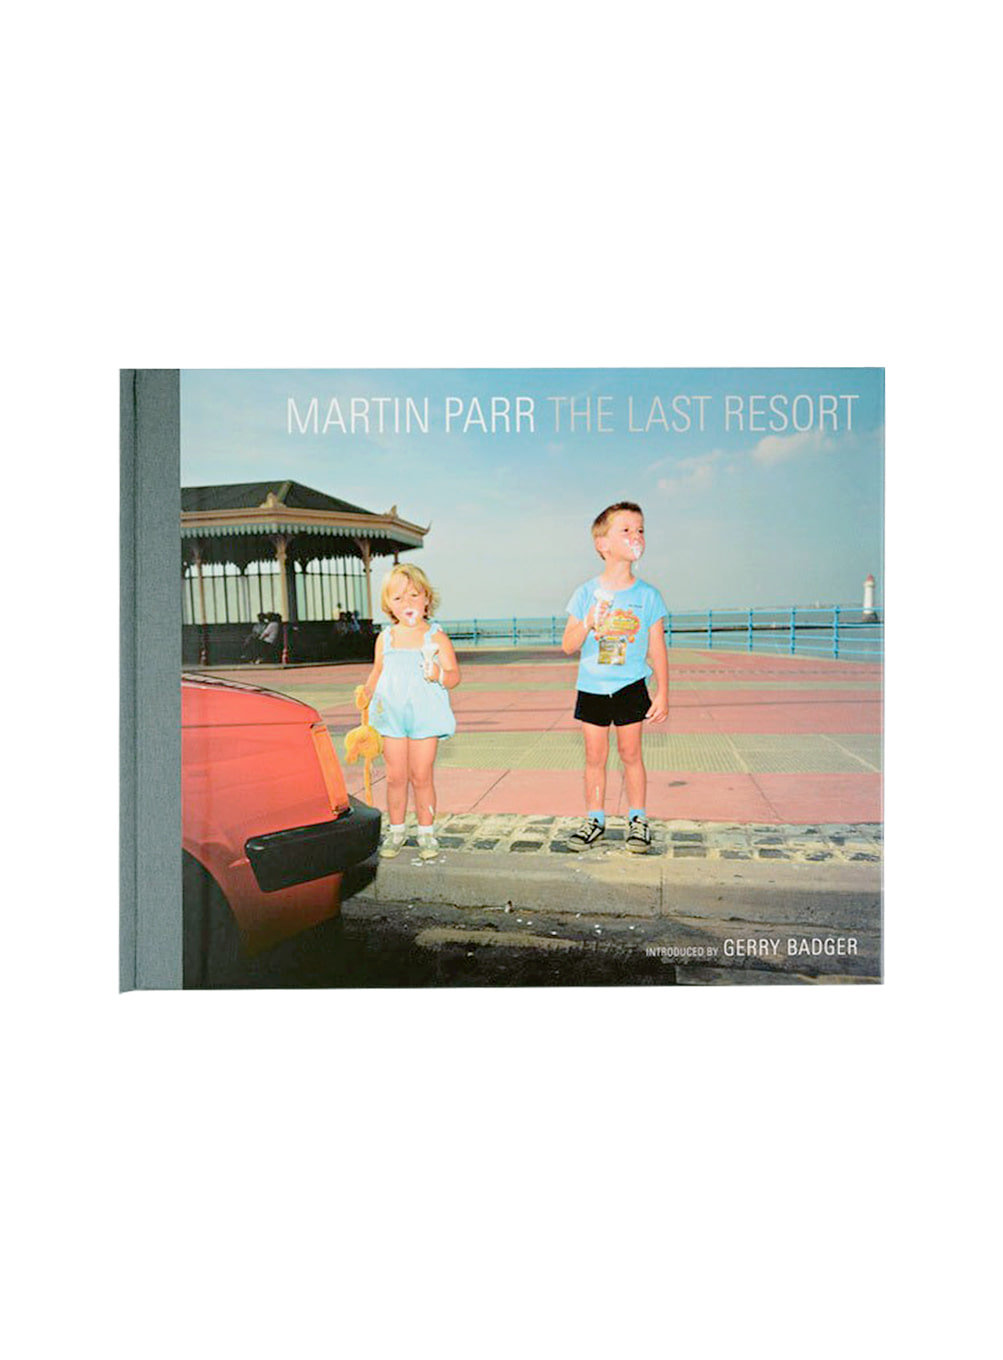 (-10%) The Last Resort by Martin Parr